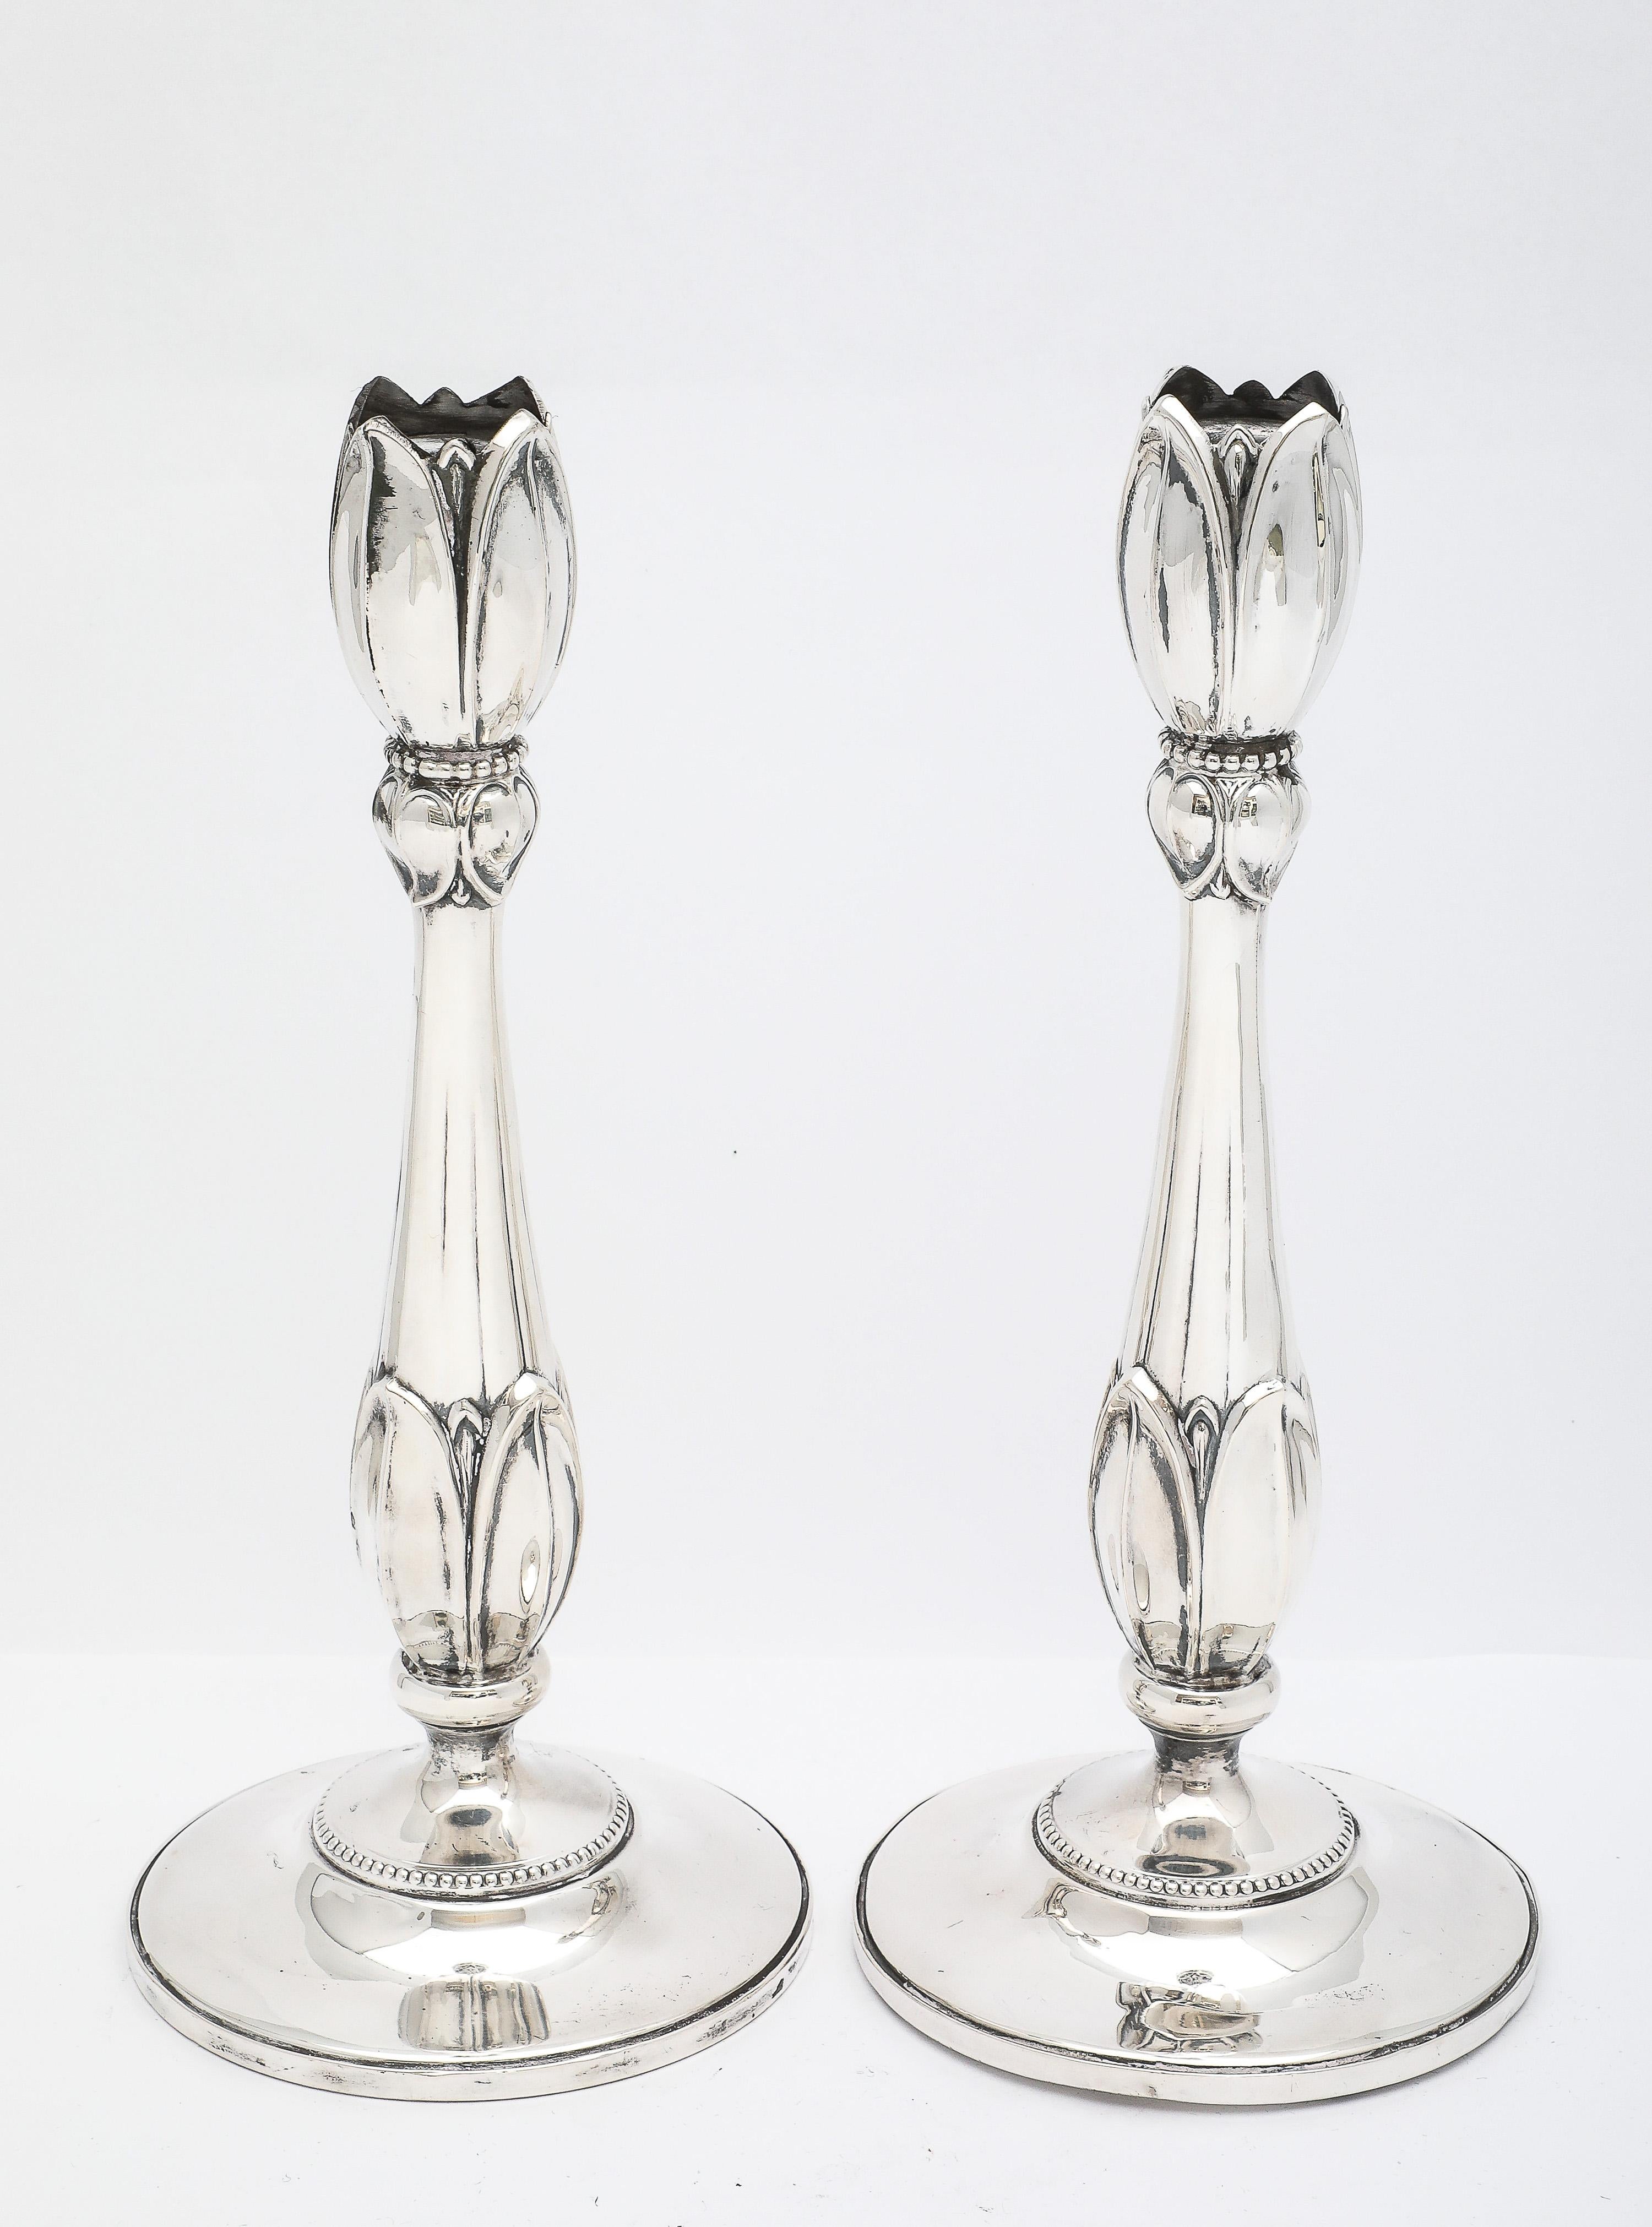 Rare Pair of Tall Sterling Silver Art Nouveau-Style Flower-Form Candlesticks For Sale 6